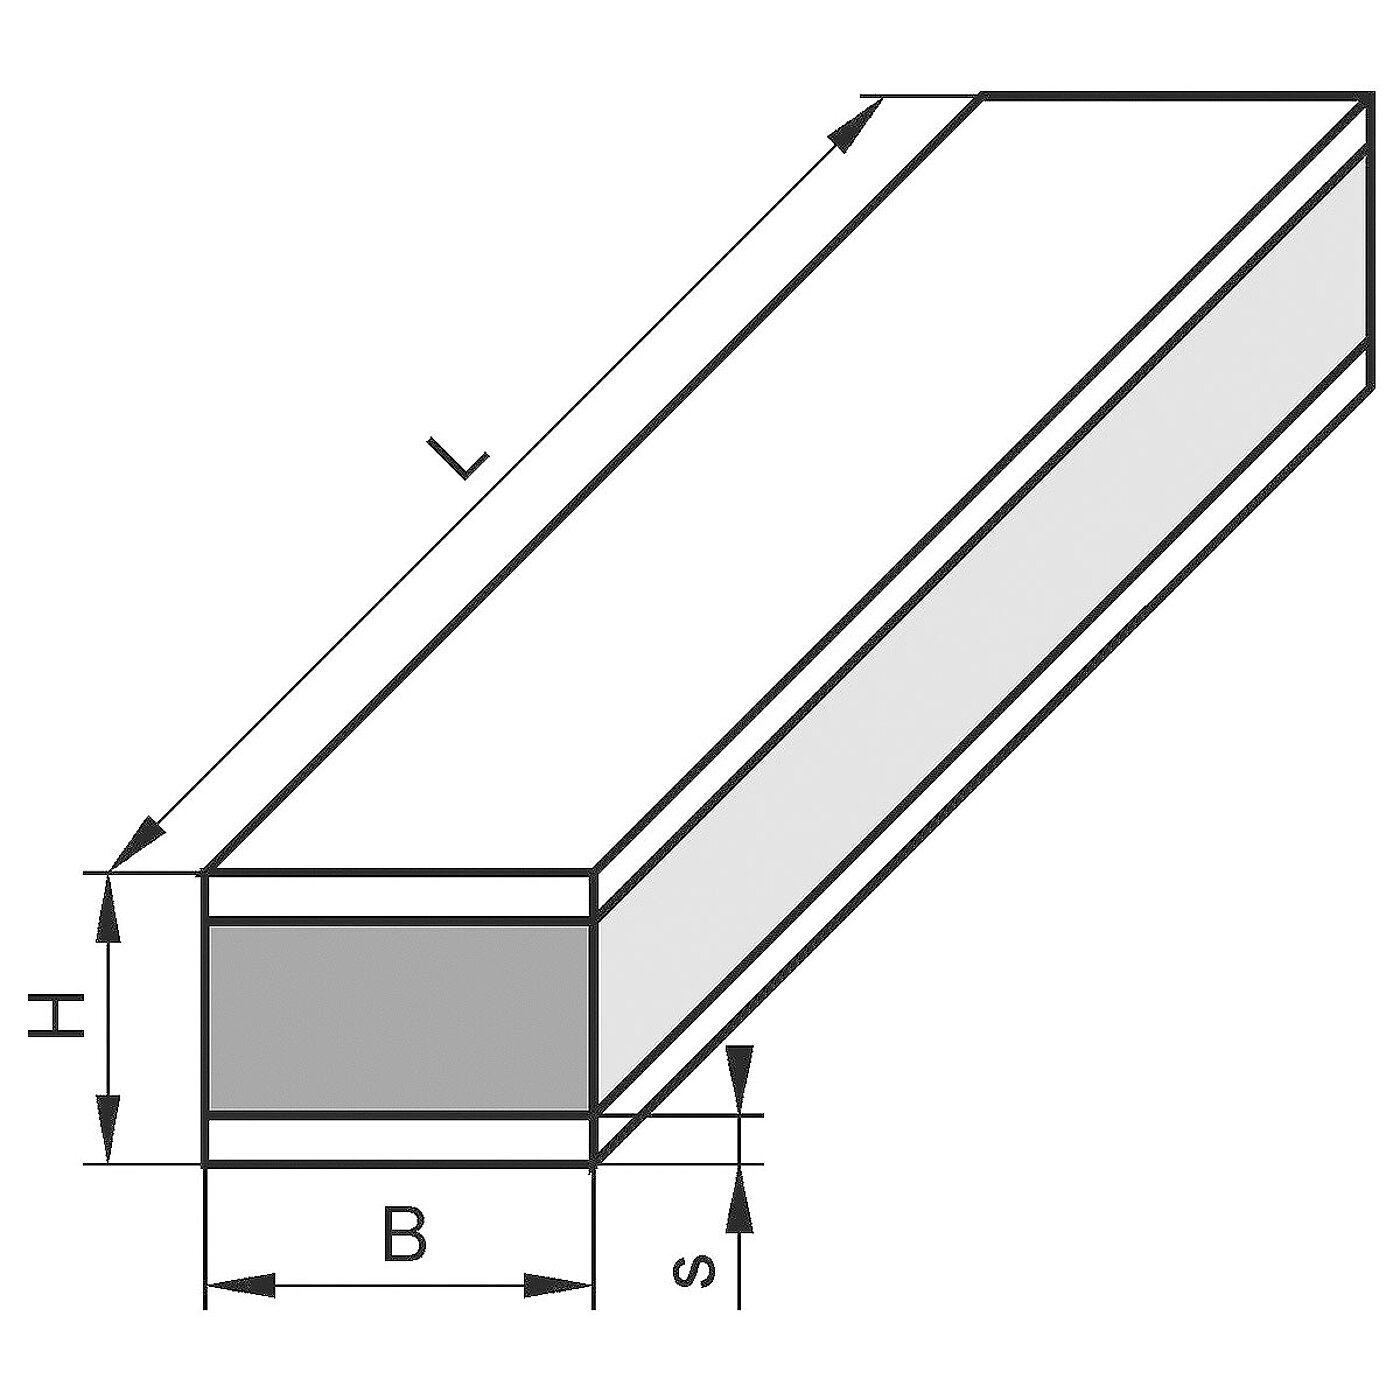 schematic drawing of an elongated elastomer, vulcanized in between two metal plates